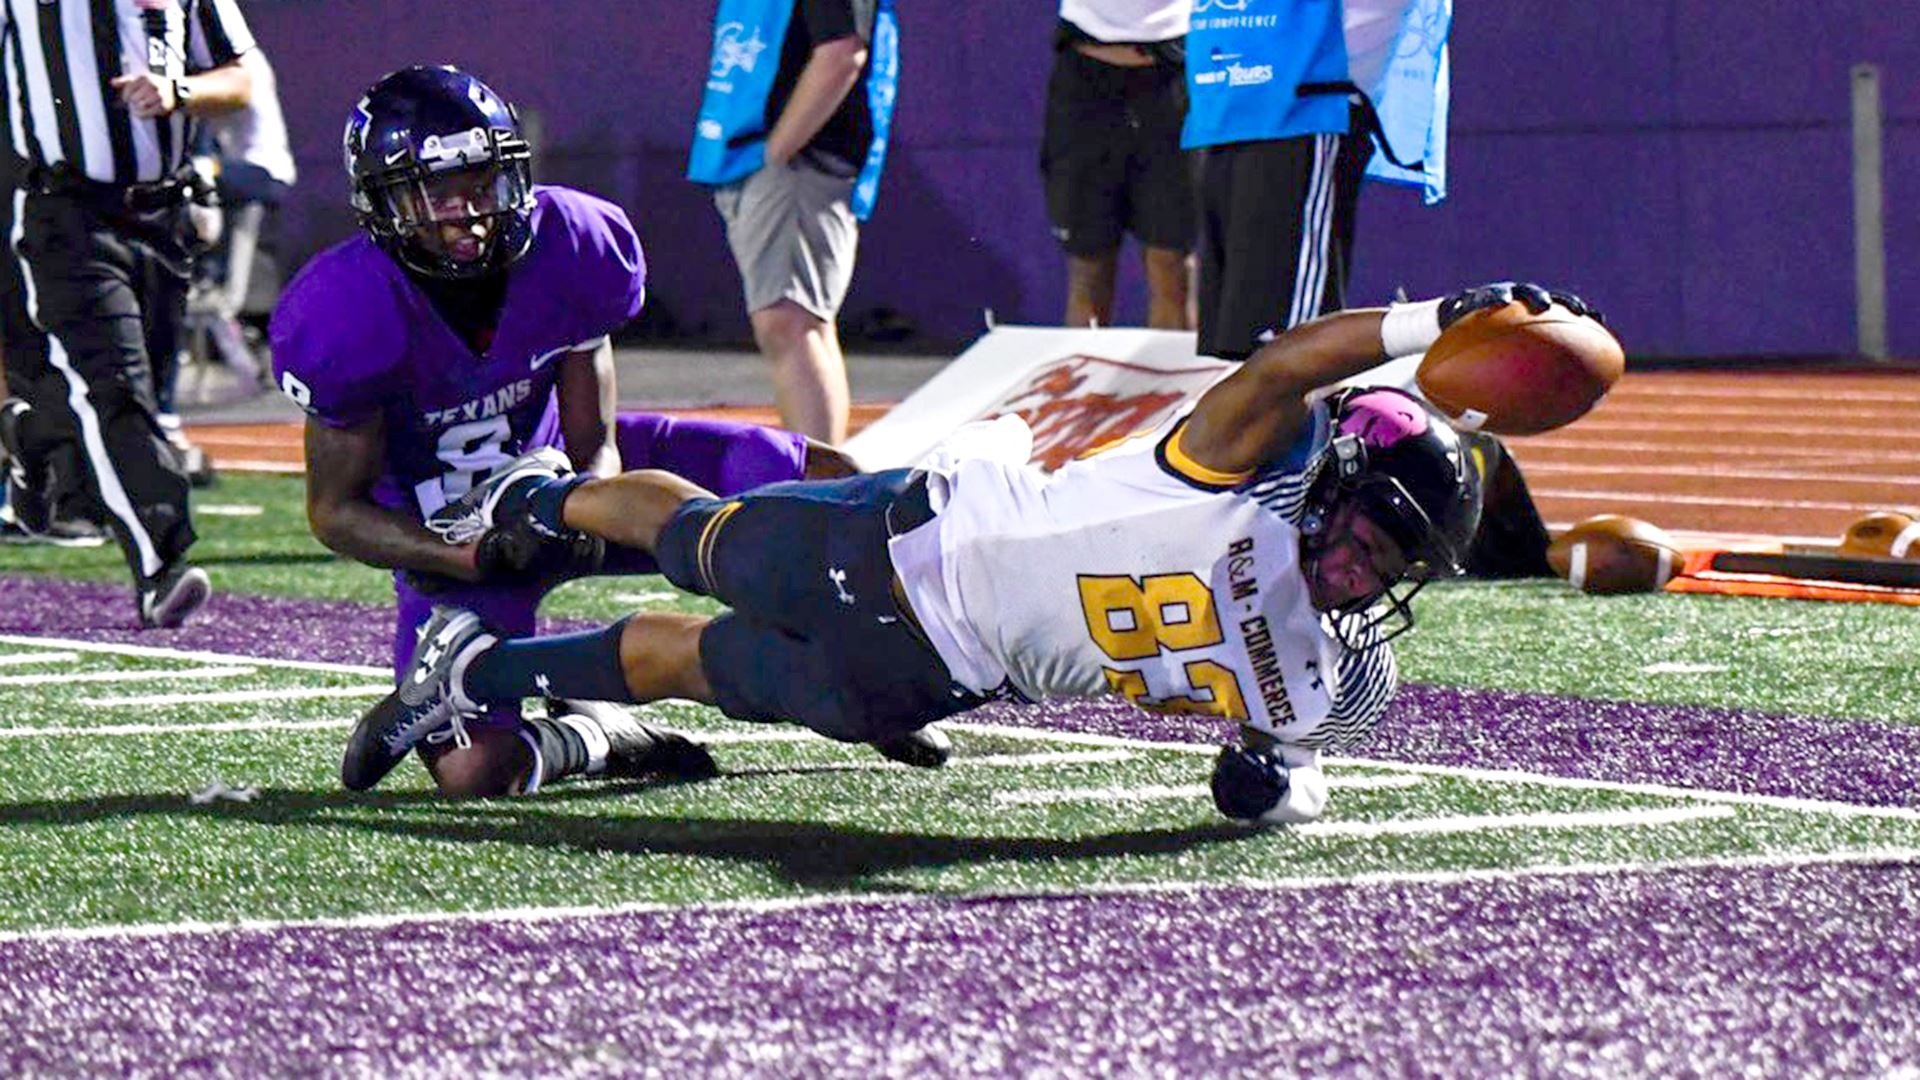 TEXAS A&M-COMMERCE FOOTBALL: No. 20 Lions fight but fall short in 35-21 loss at No. 4 Tarleton